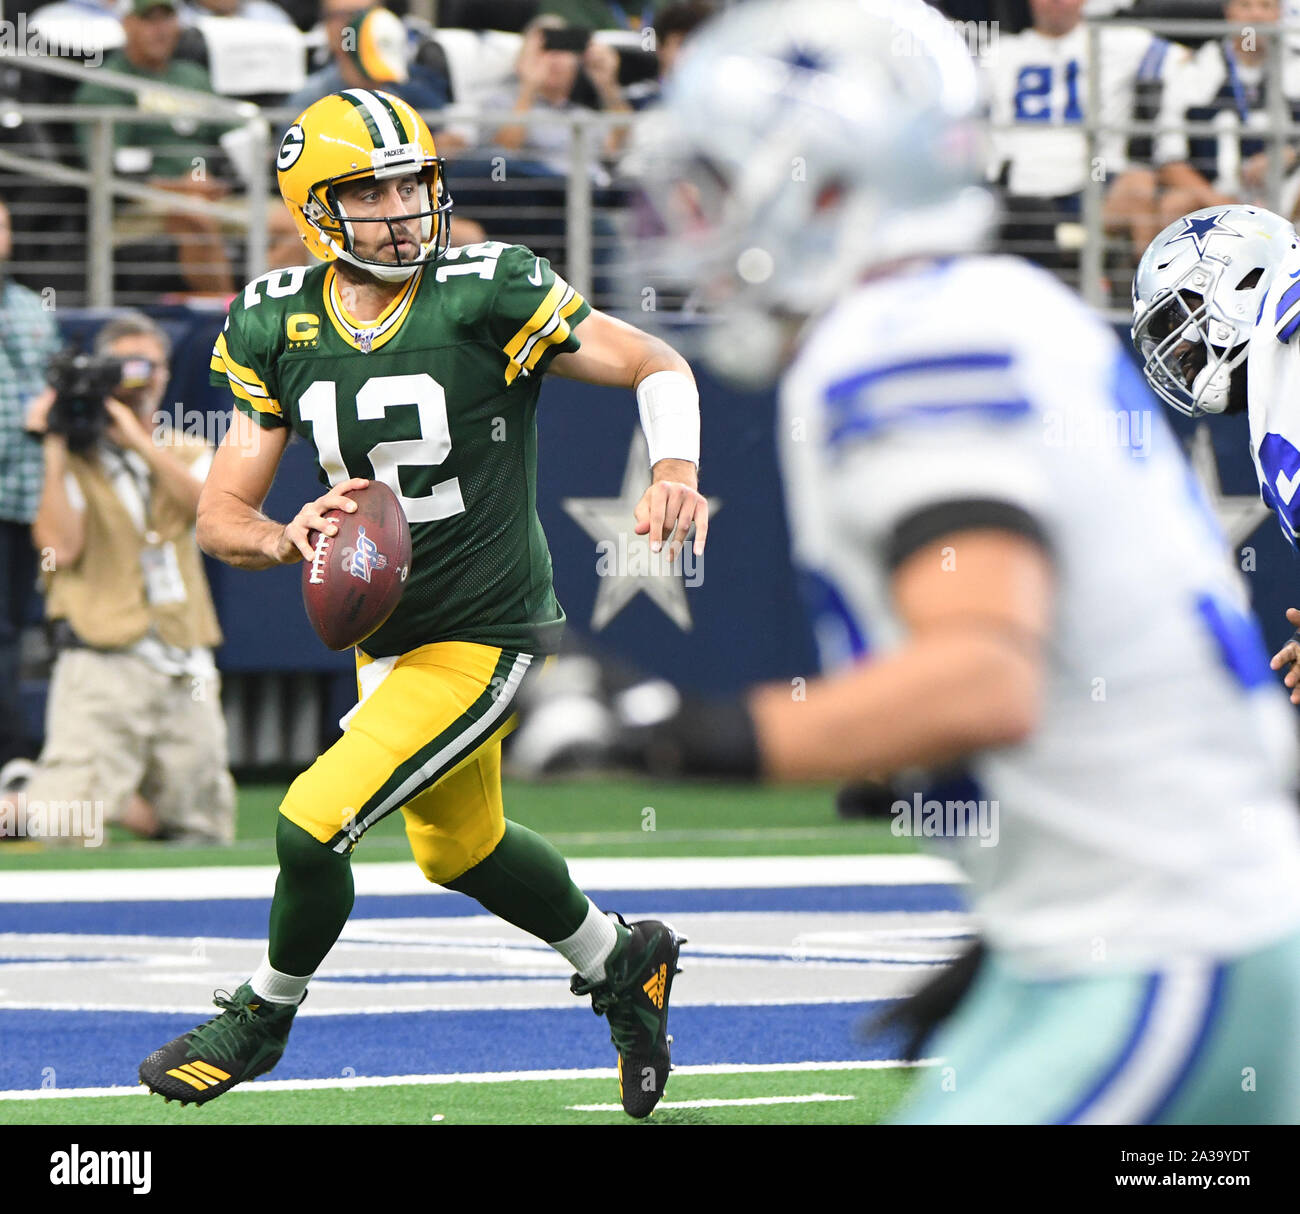 Arlington, United States. 06th Oct, 2019. Green Bay Packers Aaron Rodgers scrambles deep in his own territory during an NFL game against the Dallas Cowboys at AT&T Stadium in Arlington, Texas on Sunday, October 6, 2019. Photo by Ian Halperin/UPI Credit: UPI/Alamy Live News Stock Photo